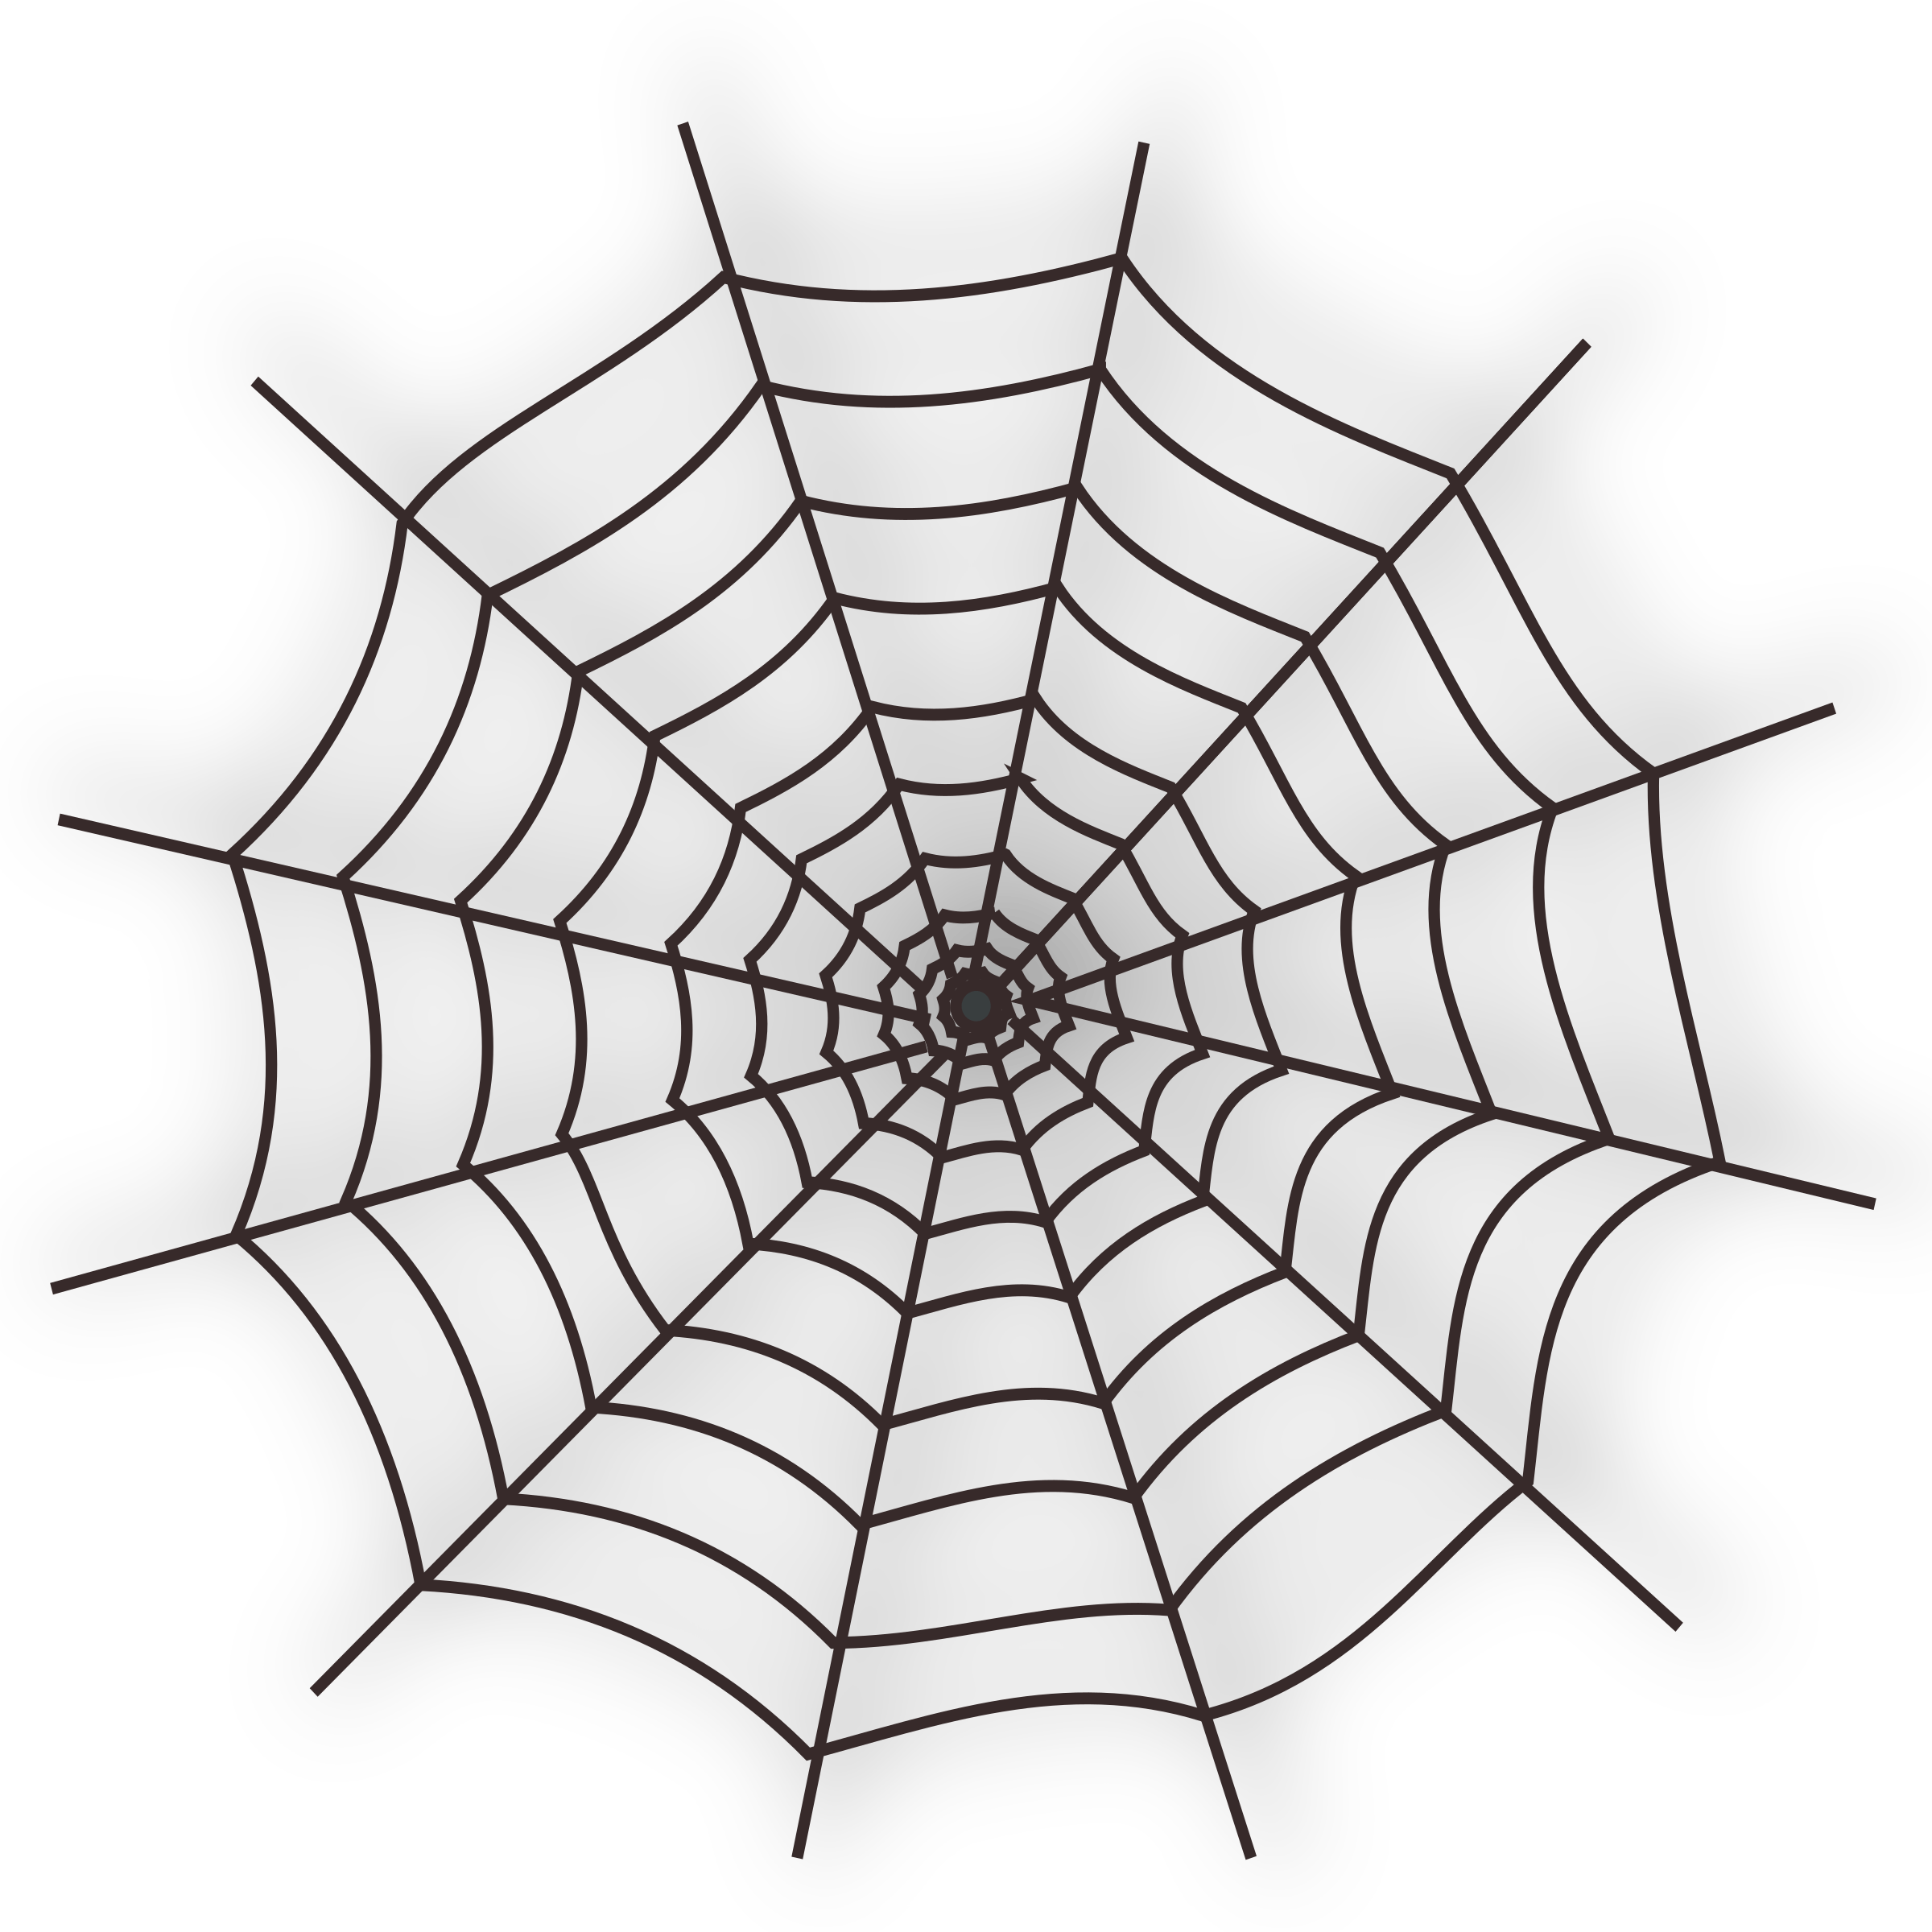 Halloween Spider Web Free PNG Image